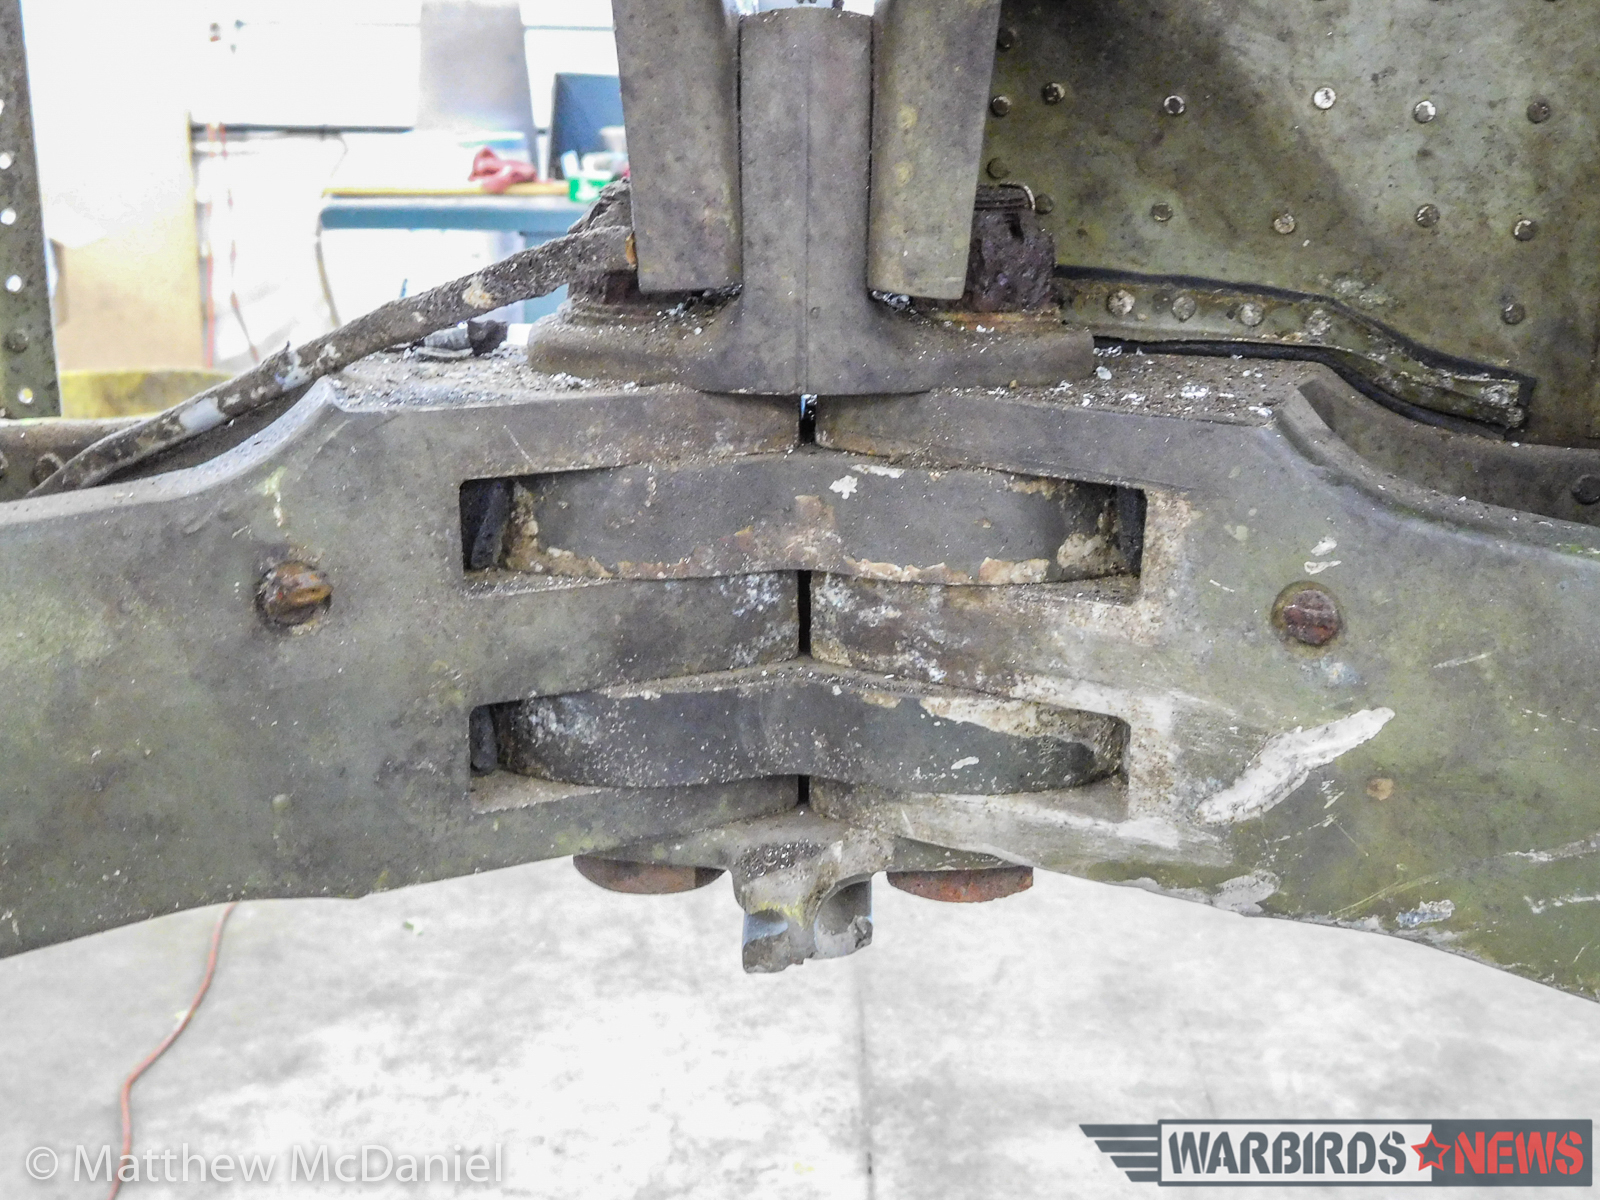 A close-up of the Helldiver's main spar center intersection. The thick metal stock used throughout the Curtiss' wing will allow a good portion of the original structure to be restored and made airworthy again, as surface corrosion can be removed with more than enough metal remaining to meet thickness and strength specifications required. (photo by Matthew McDaniel)